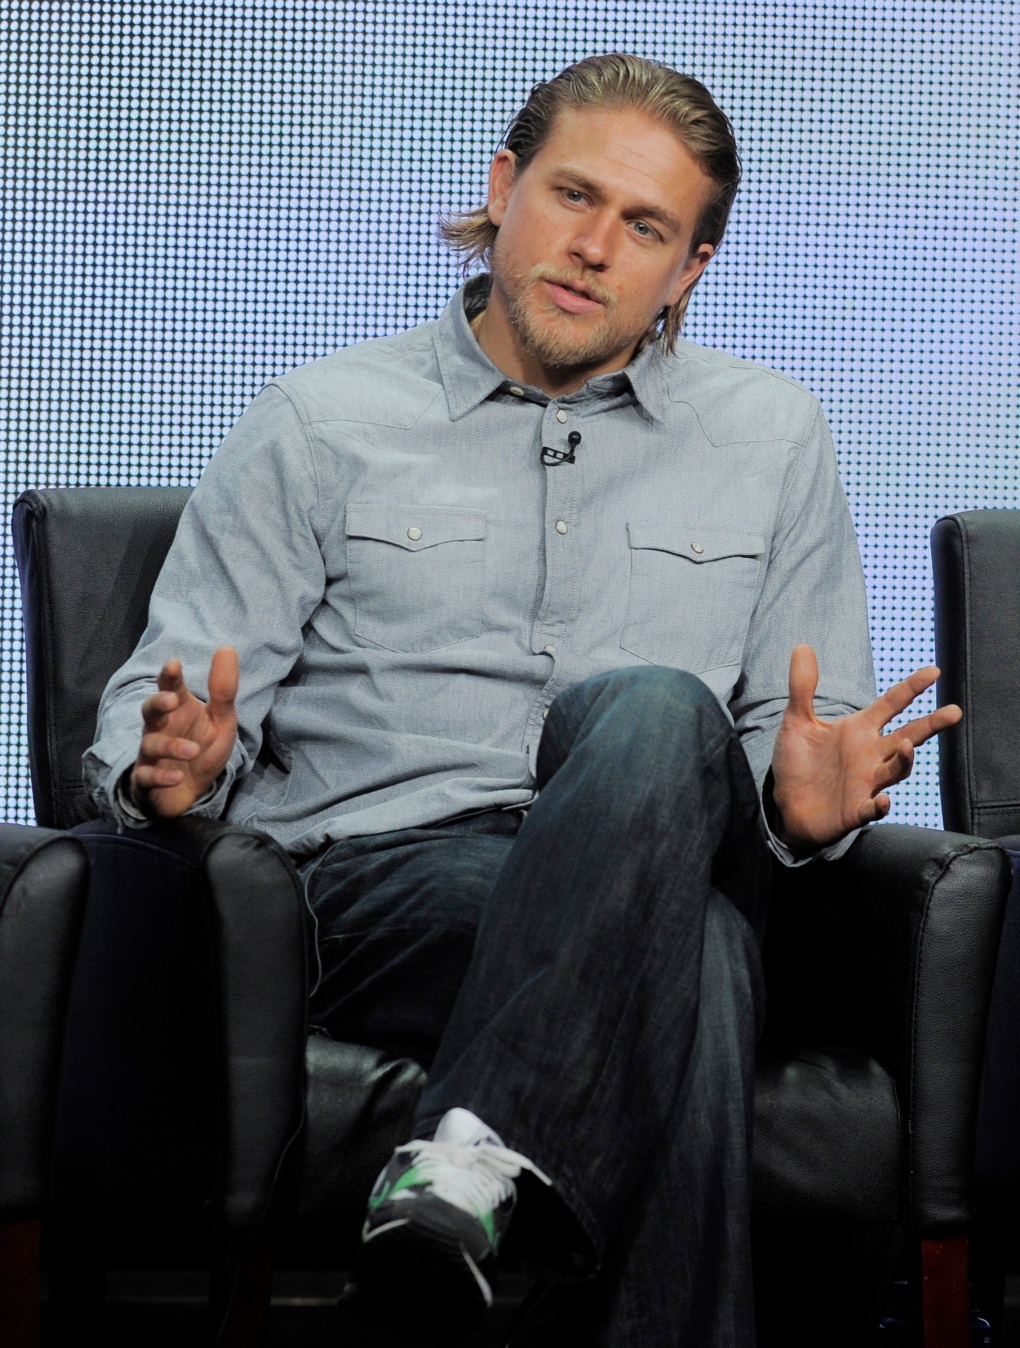 Charlie Hunnam drops out of Fifty Shades movie